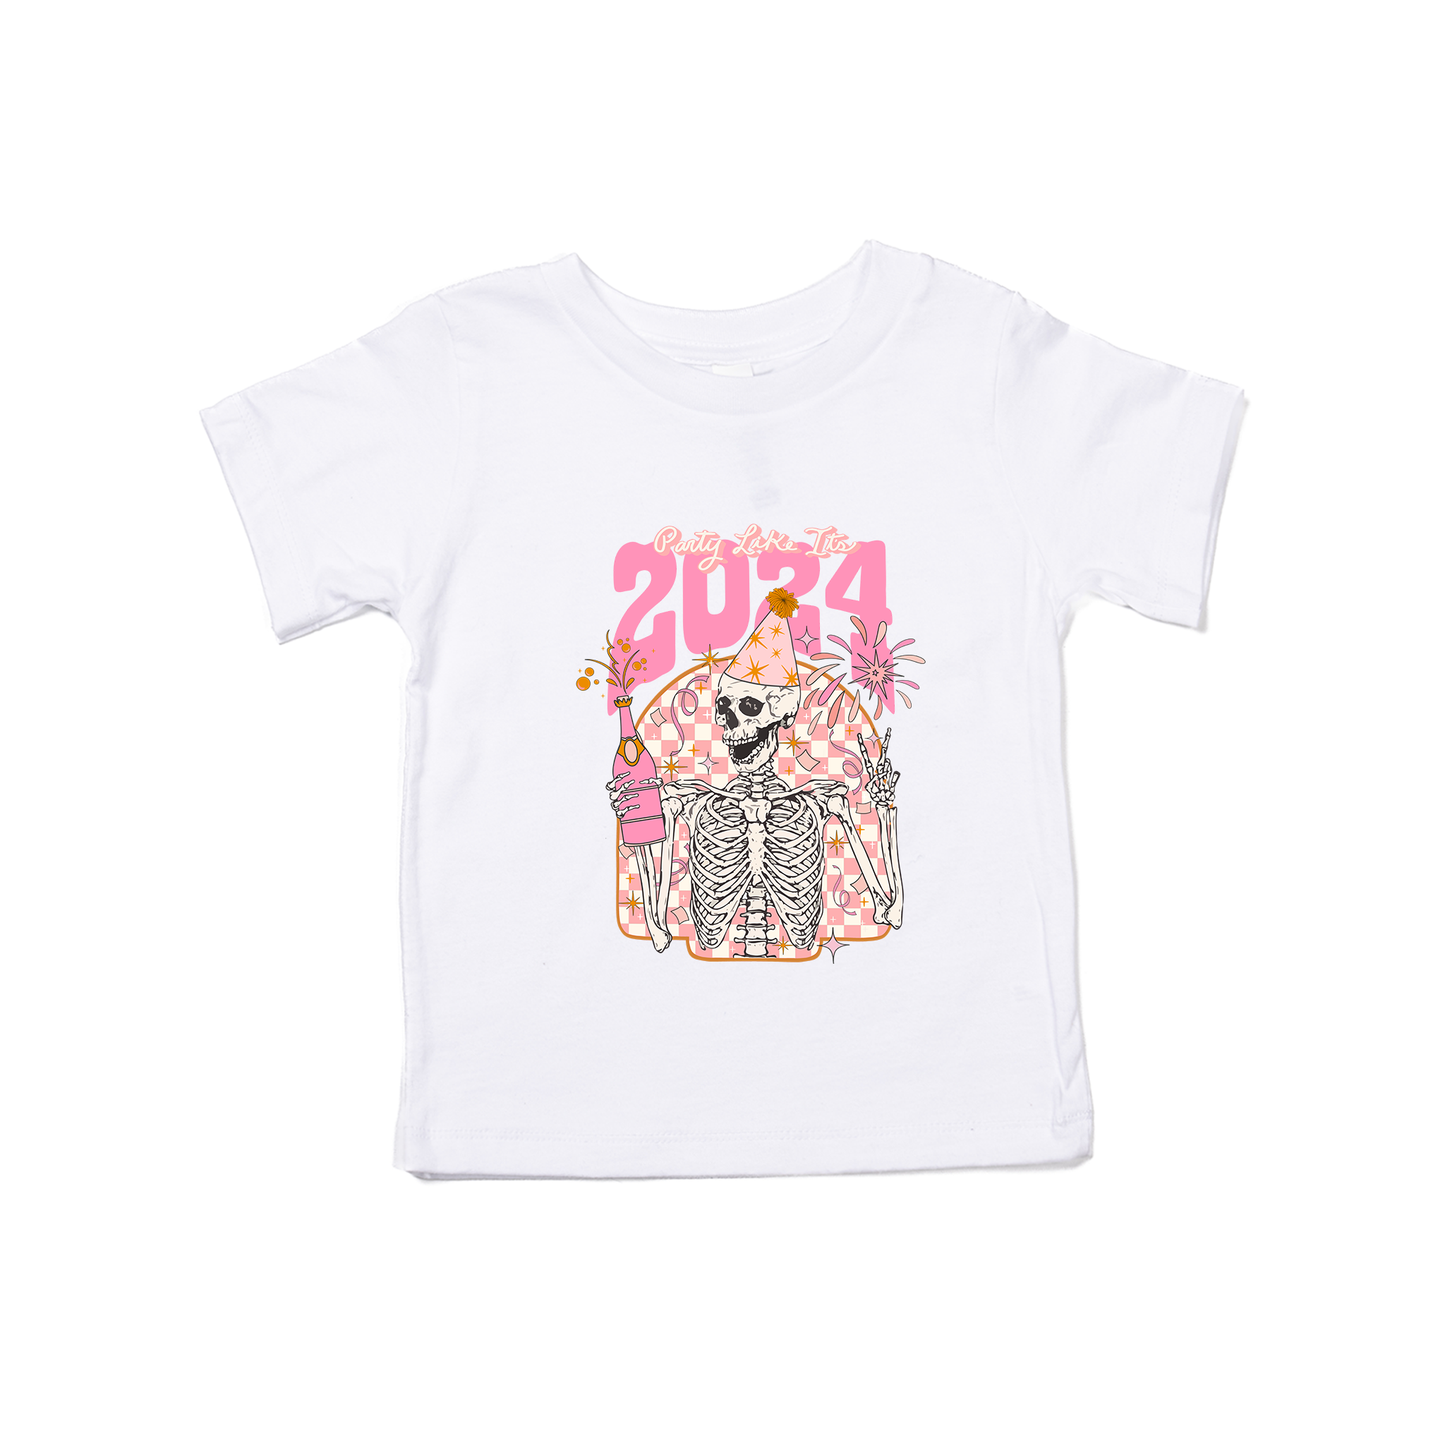 Party like it's 2024 - Kids Tee (White)